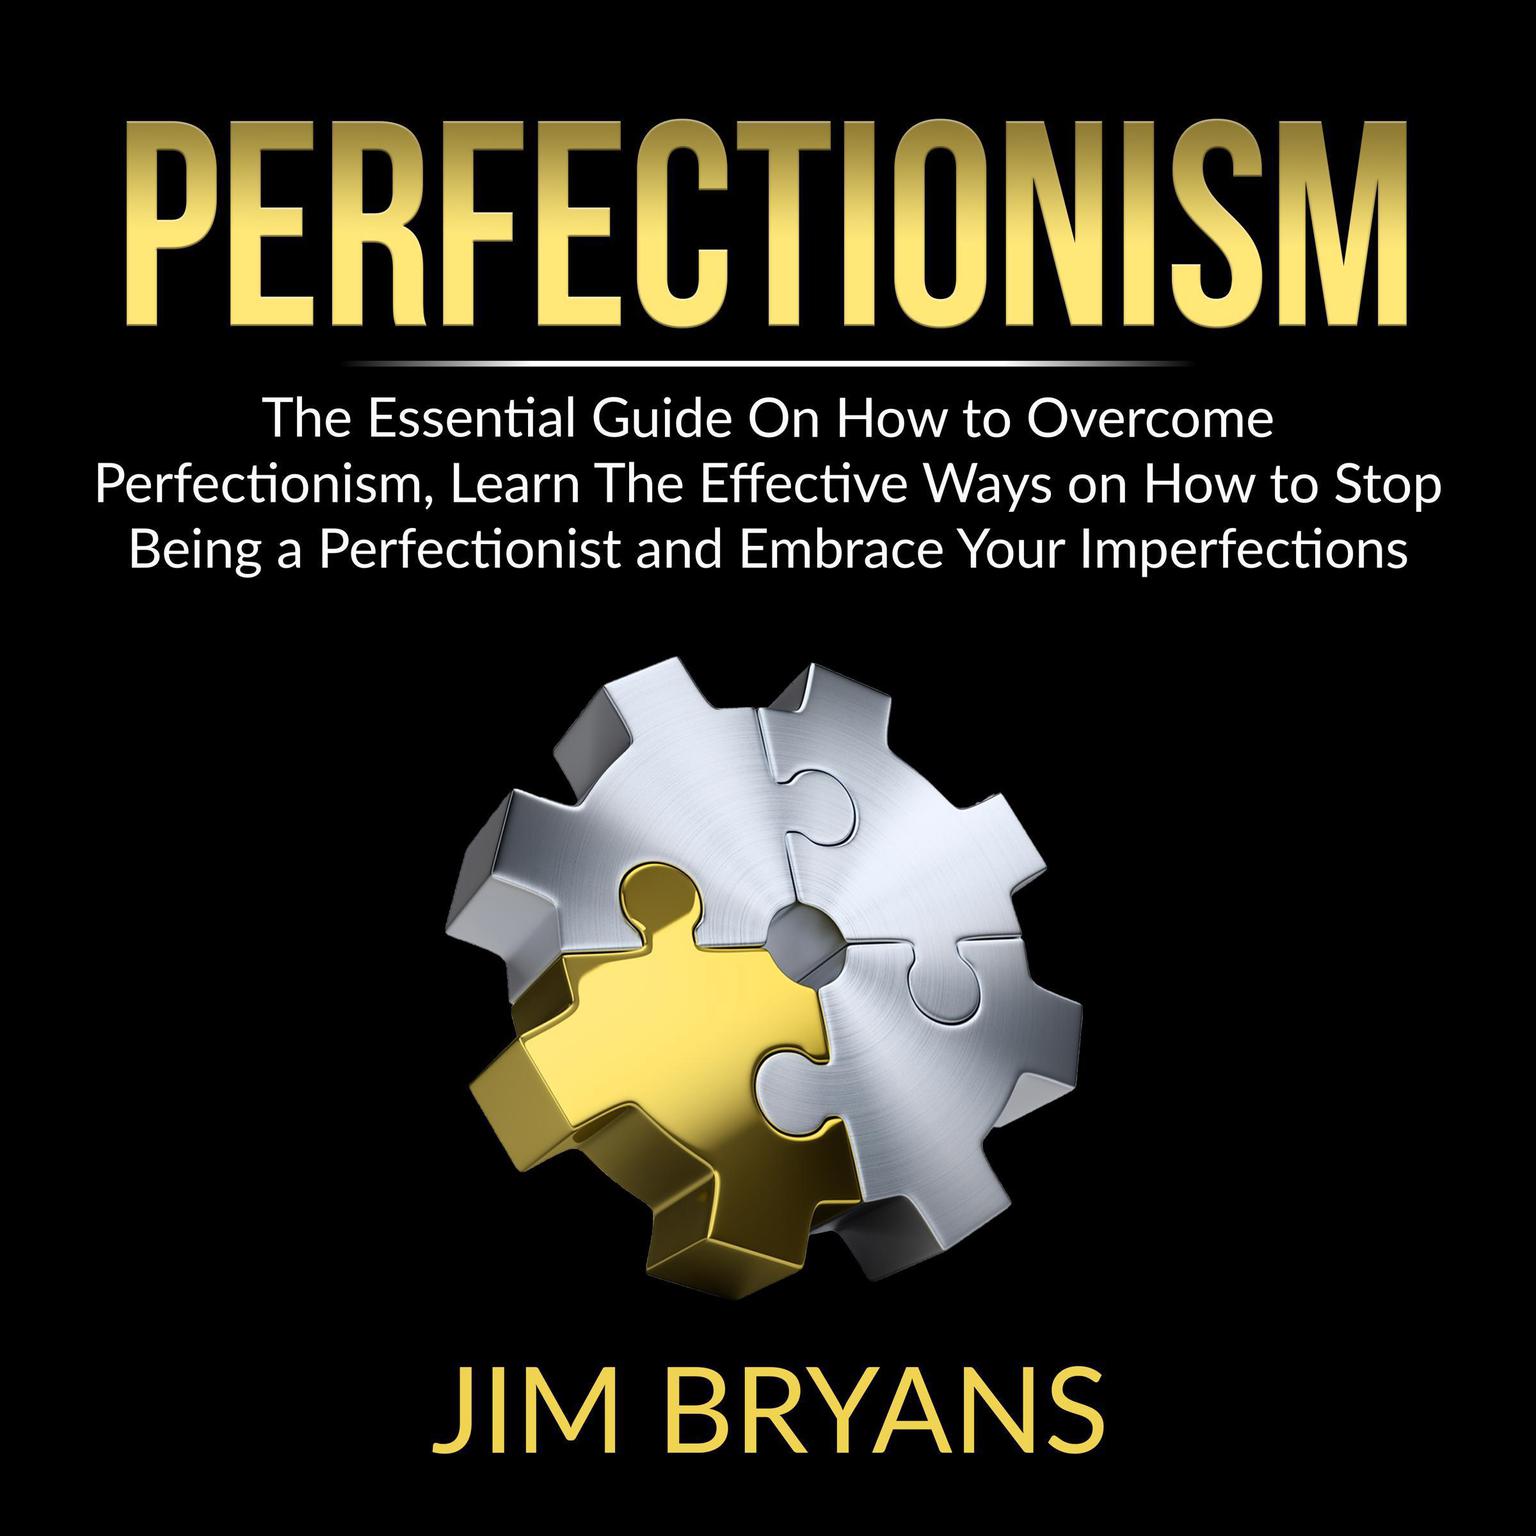 Perfectionism: The Essential Guide On How to Overcome Perfectionism, Learn The Effective Ways on How to Stop Being a Perfectionist And Help Your Business Achieve Success Quicker: The Essential Guide On How to Overcome Perfectionism, Learn The Effective Ways on How to Stop Being a Perfectionist And Help Your Business Achieve Success Quicker  Audiobook, by Jim Bryans